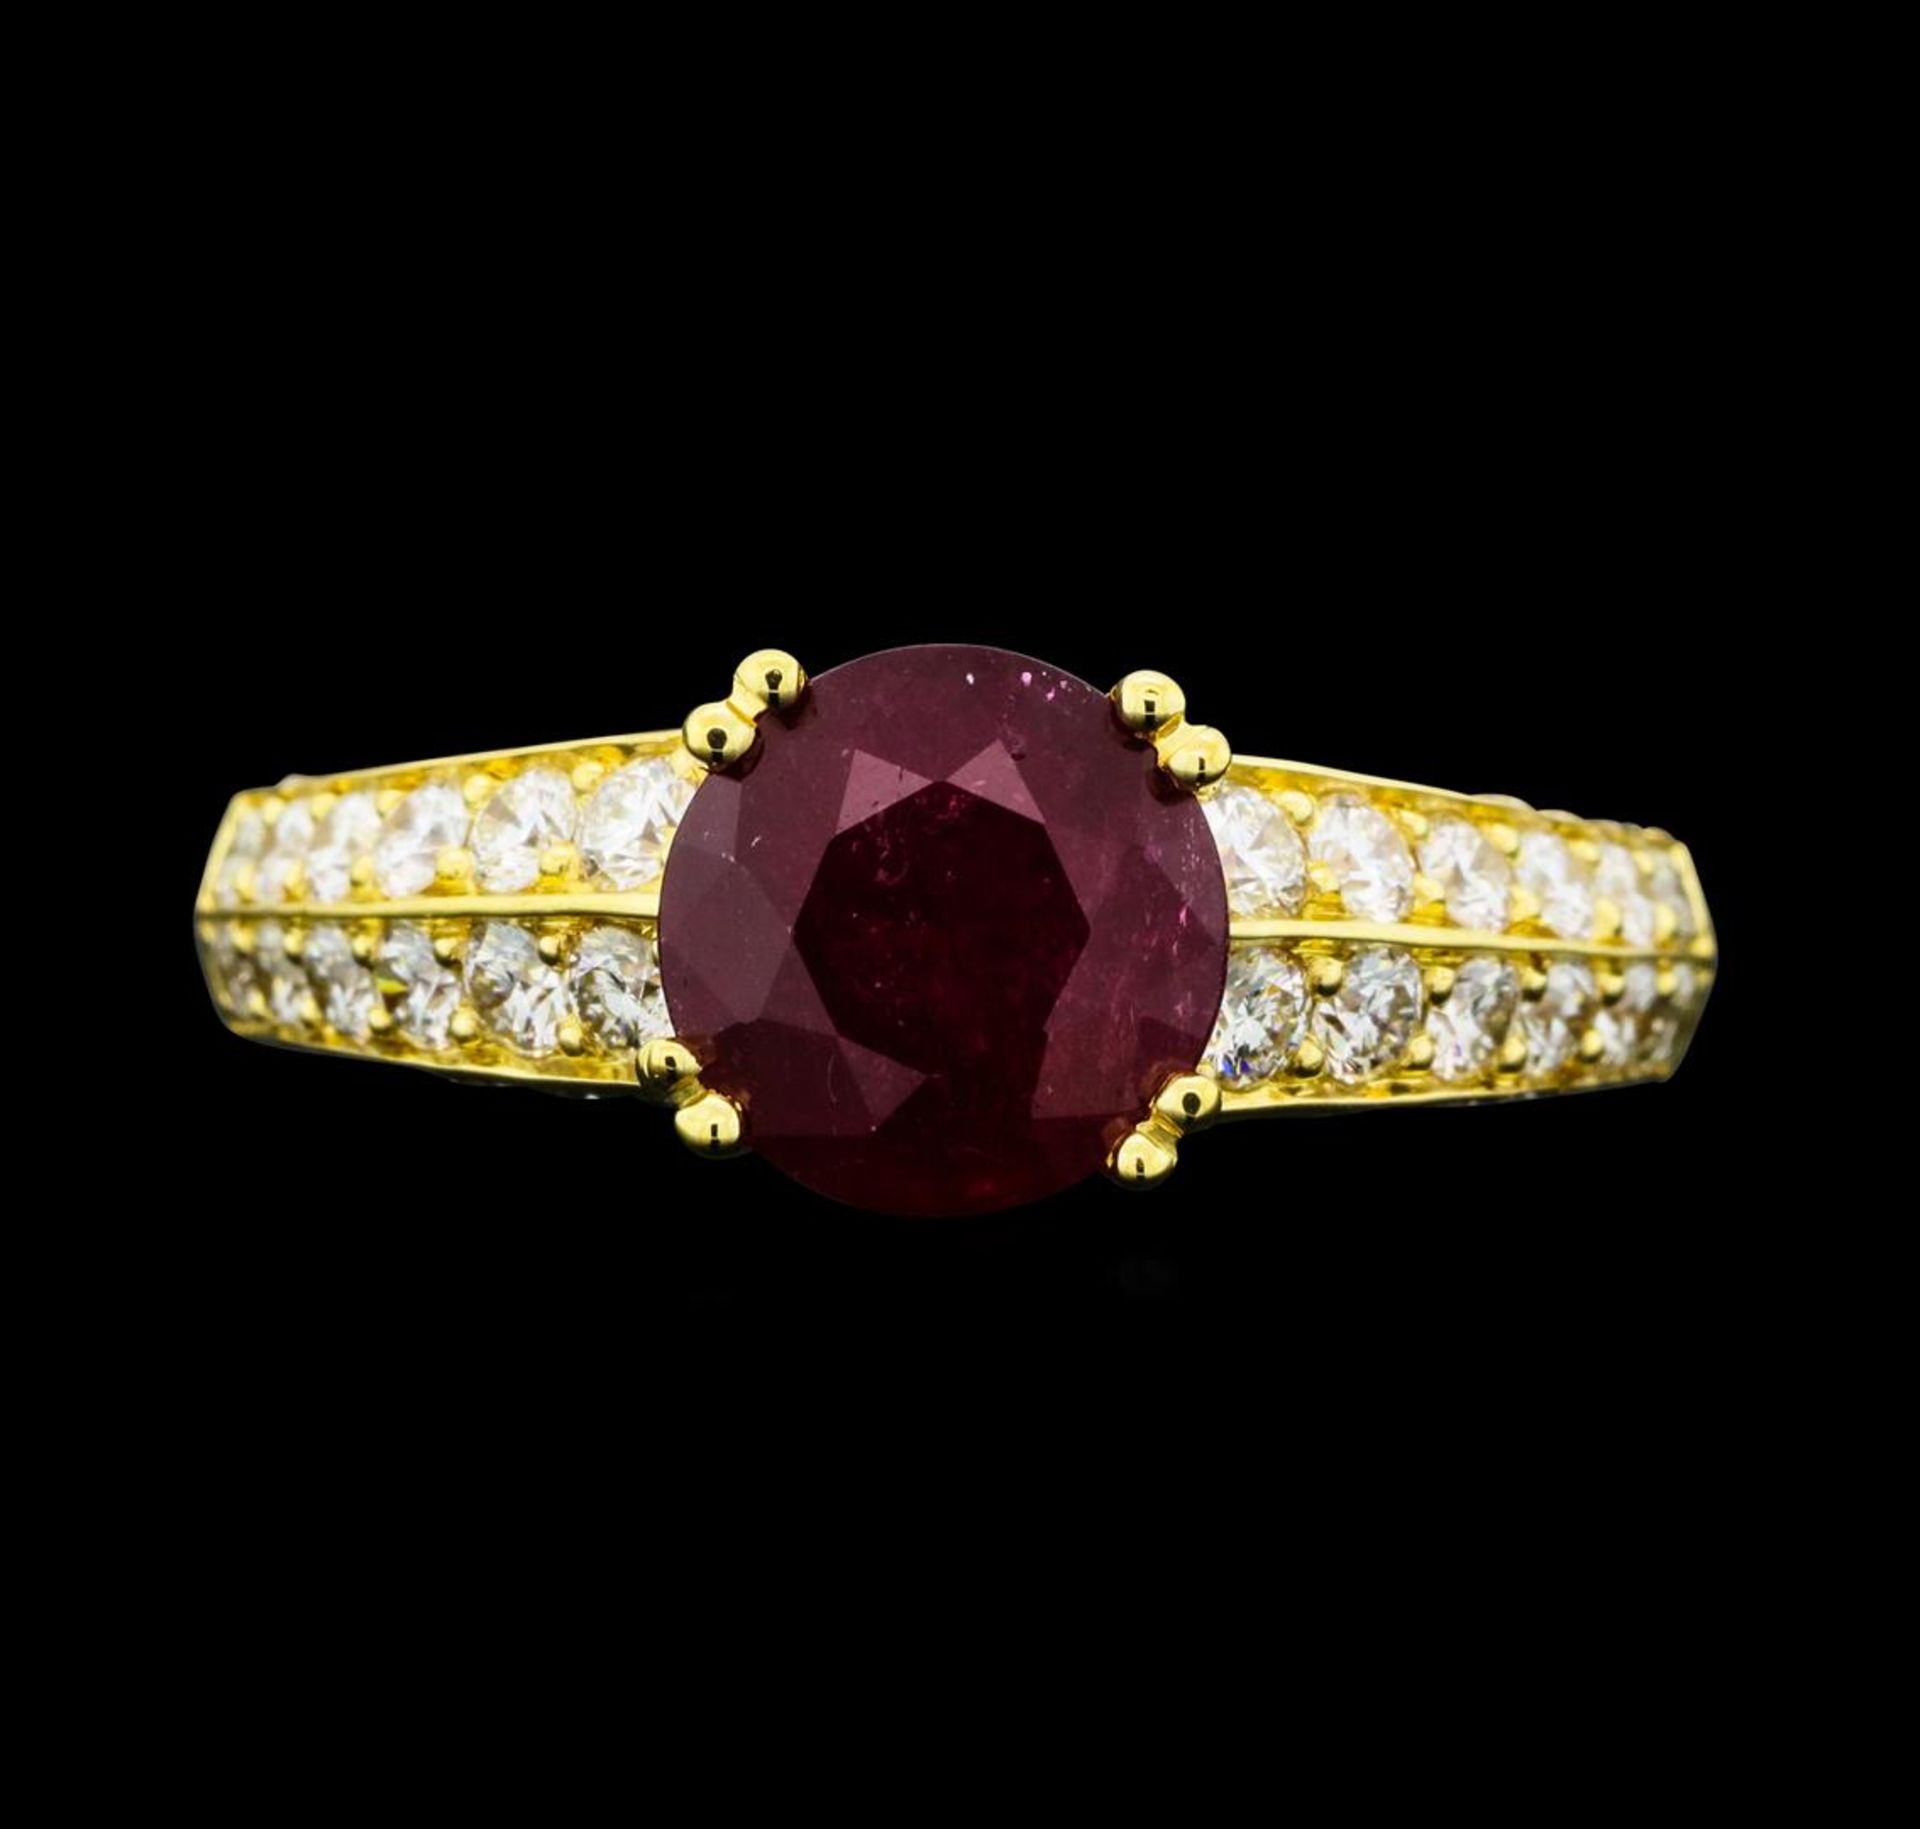 2.54ct Ruby And Diamond Ring - 18KT Yellow Gold - Image 2 of 5